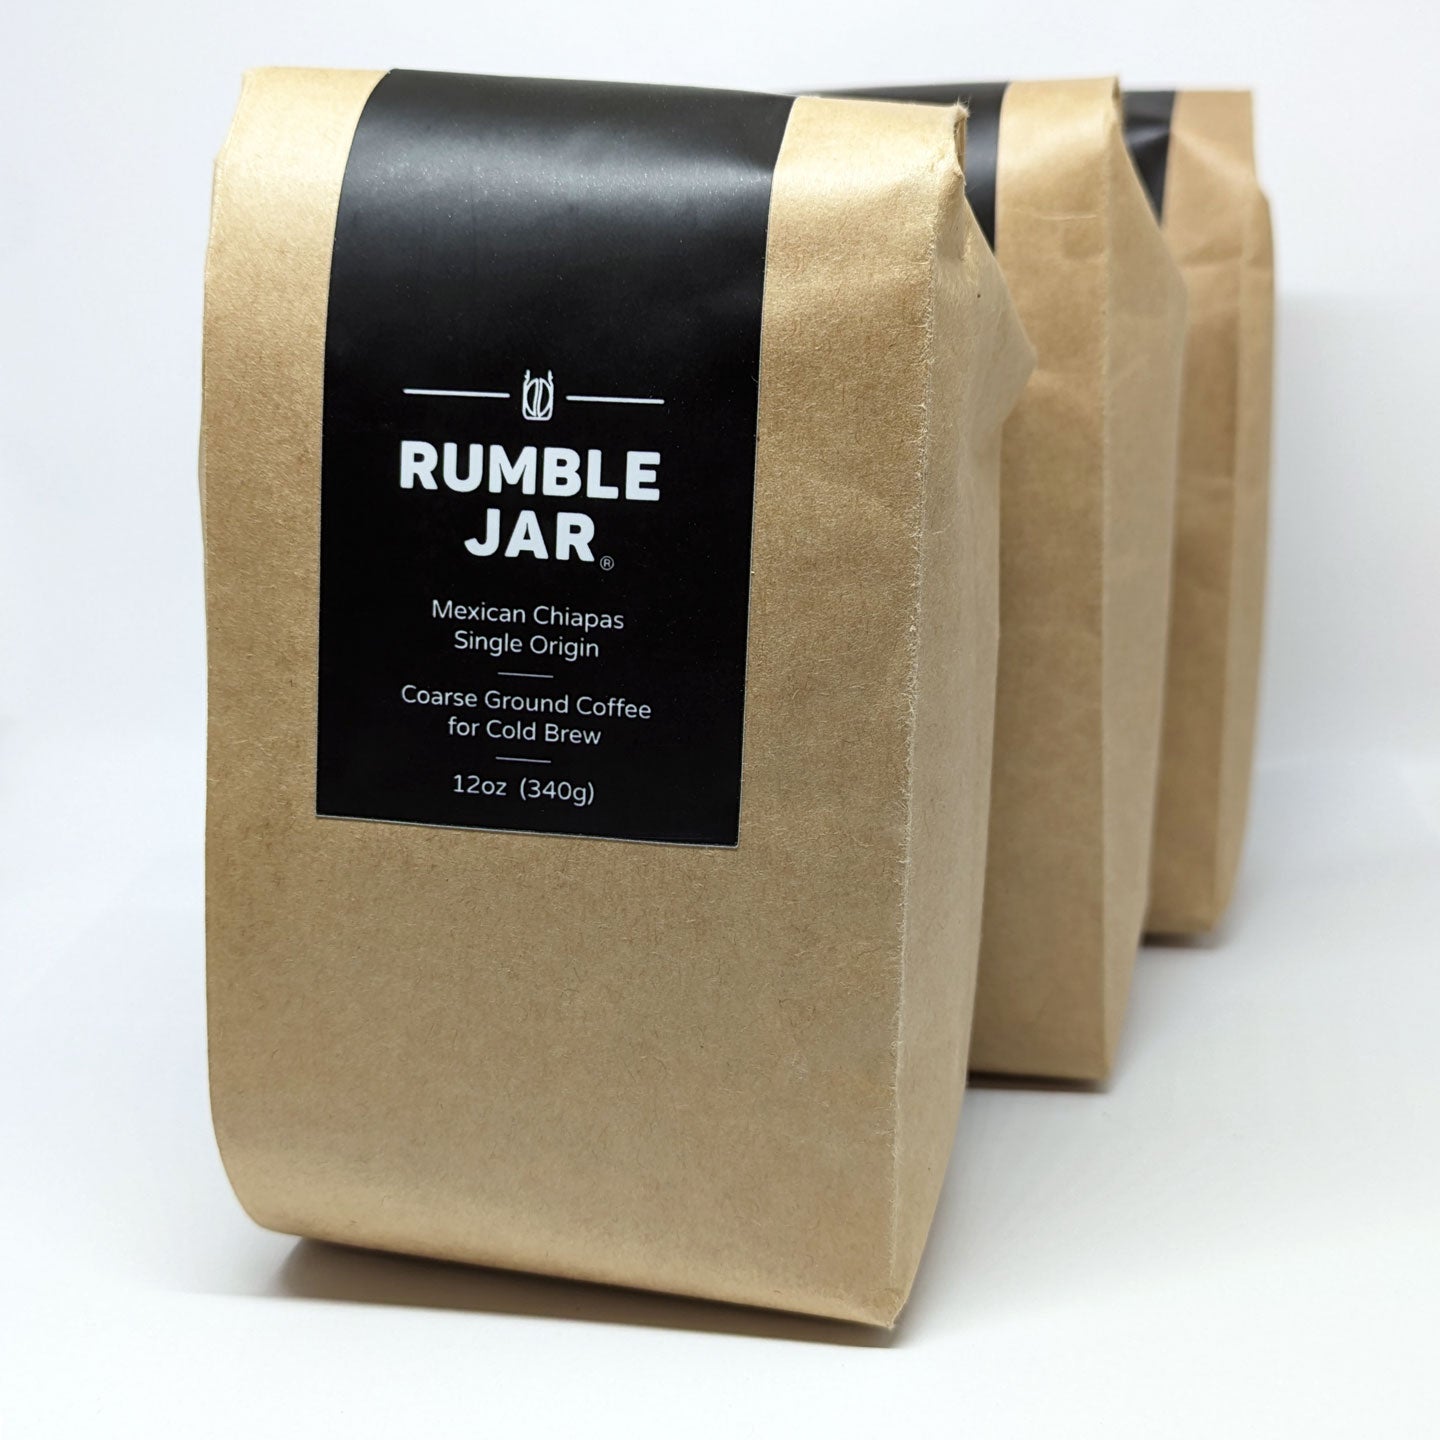 3 bags of Rumble Jar coarse ground coffee for cold brew - white background